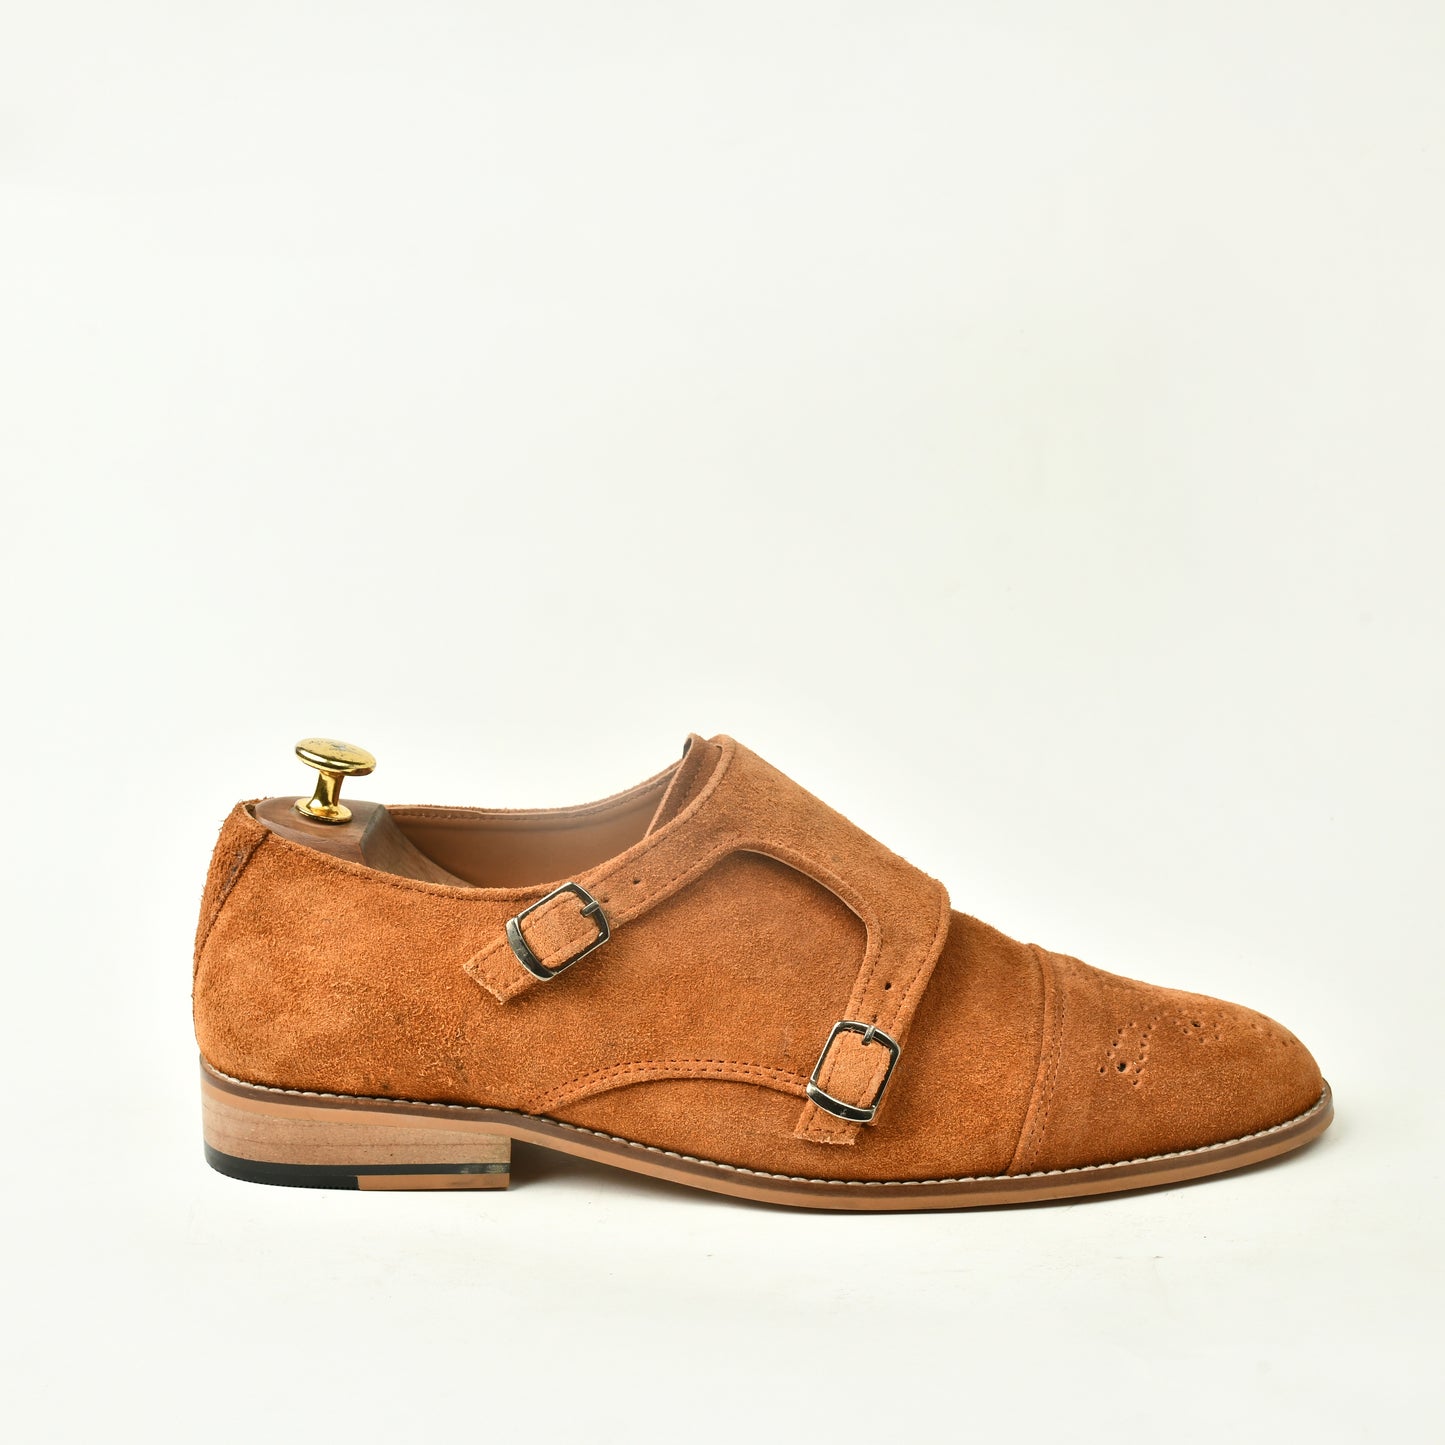 Suede Leather Monk Straps - Tan